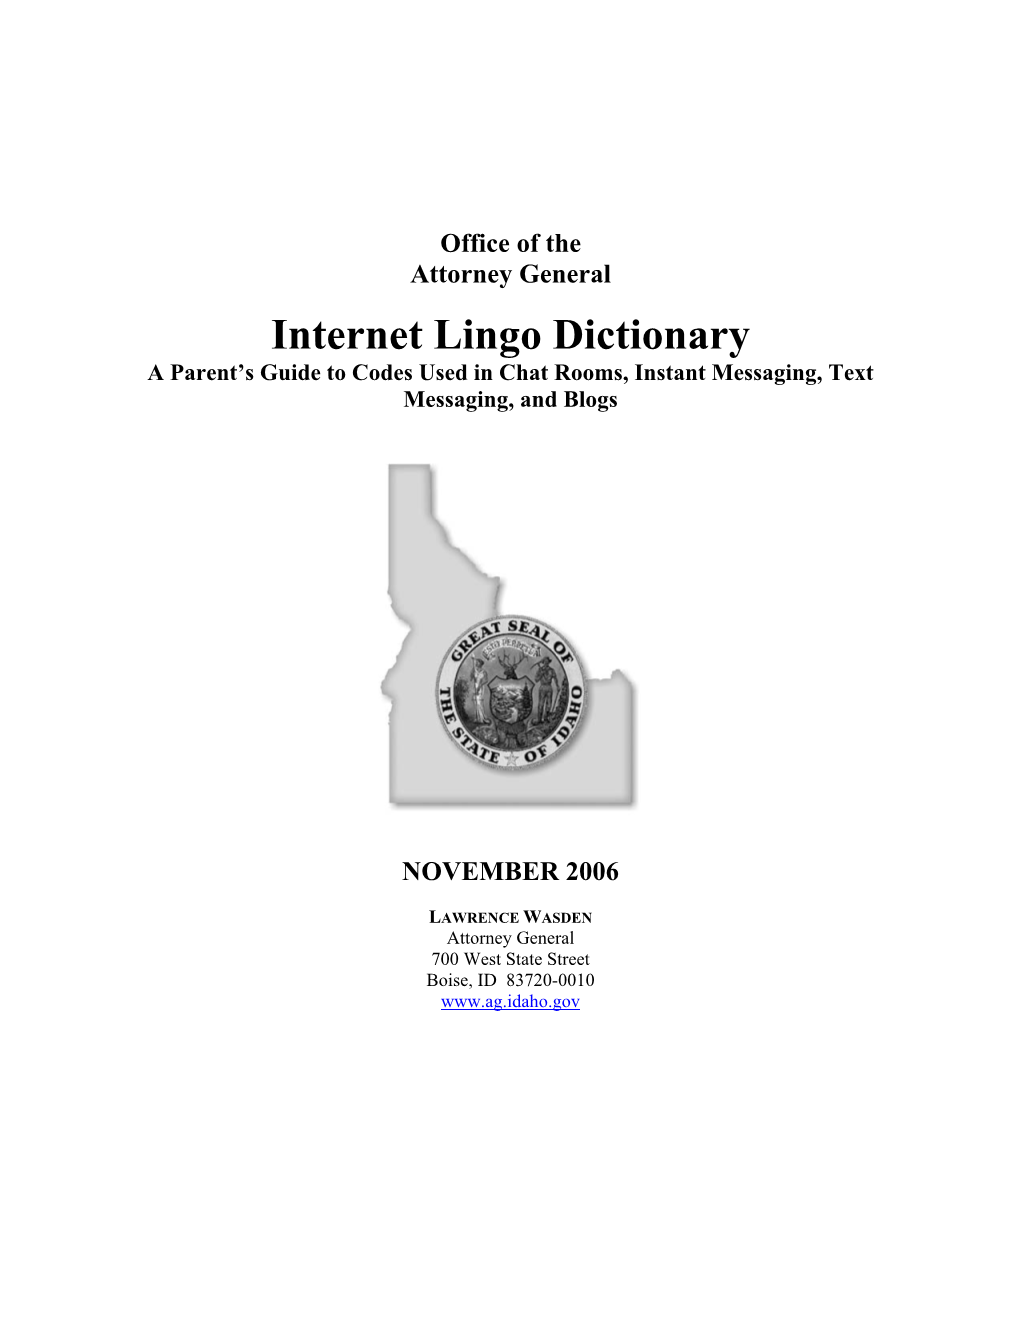 Internet Lingo Dictionary a Parent’S Guide to Codes Used in Chat Rooms, Instant Messaging, Text Messaging, and Blogs